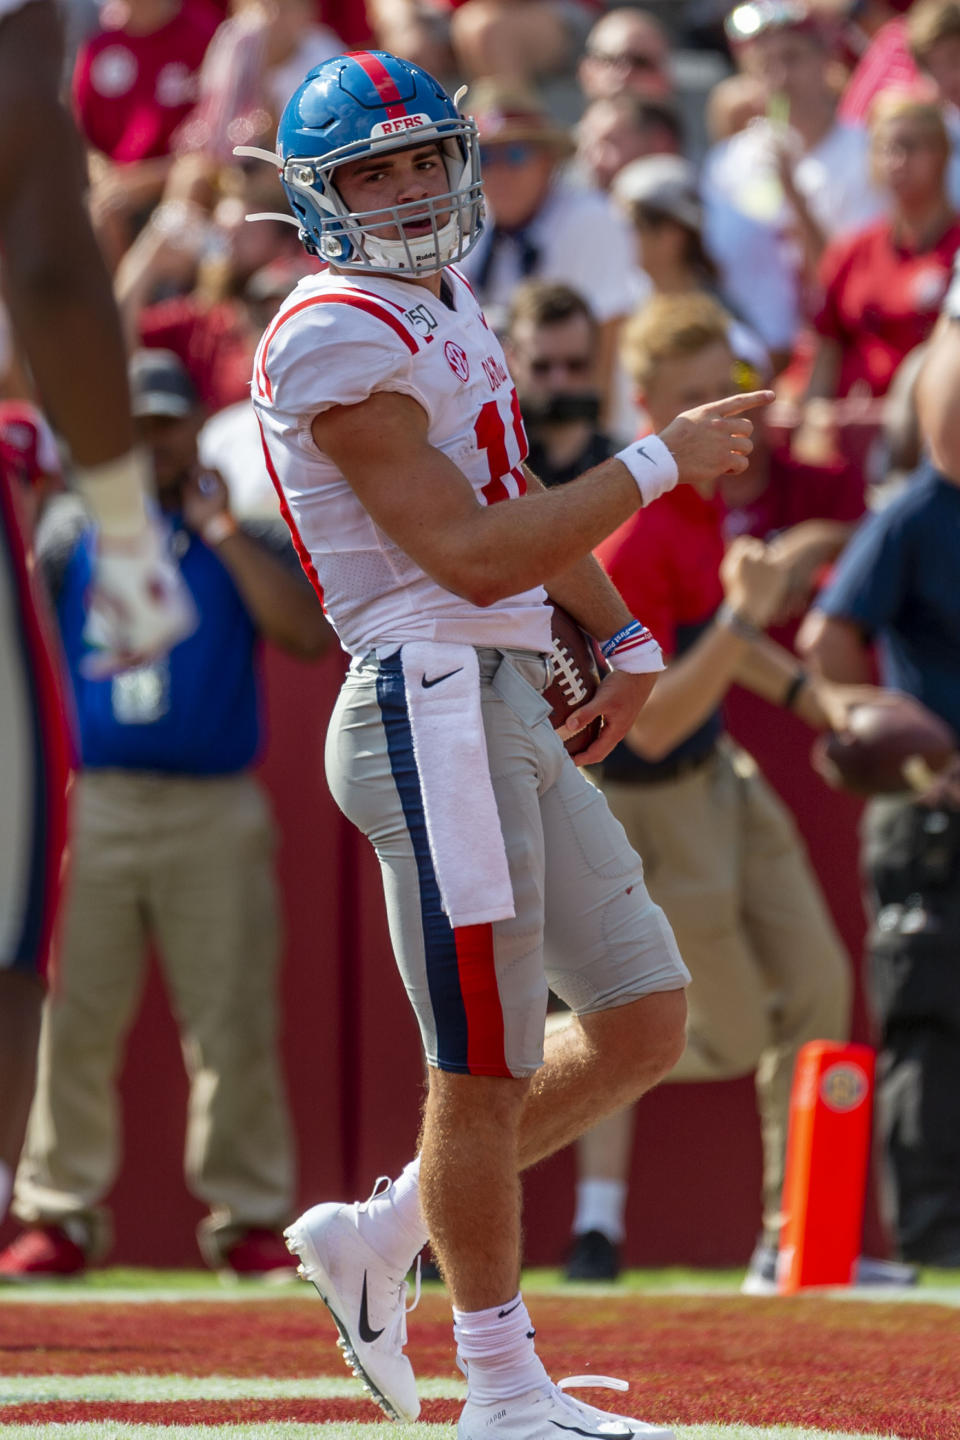 Mississippi quarterback John Rhys Plumlee (10) celebrates his touchdown run against Alabama during the first half of an NCAA college football game, Saturday, Sept. 28, 2019, in Tuscaloosa, Ala. (AP Photo/Vasha Hunt)